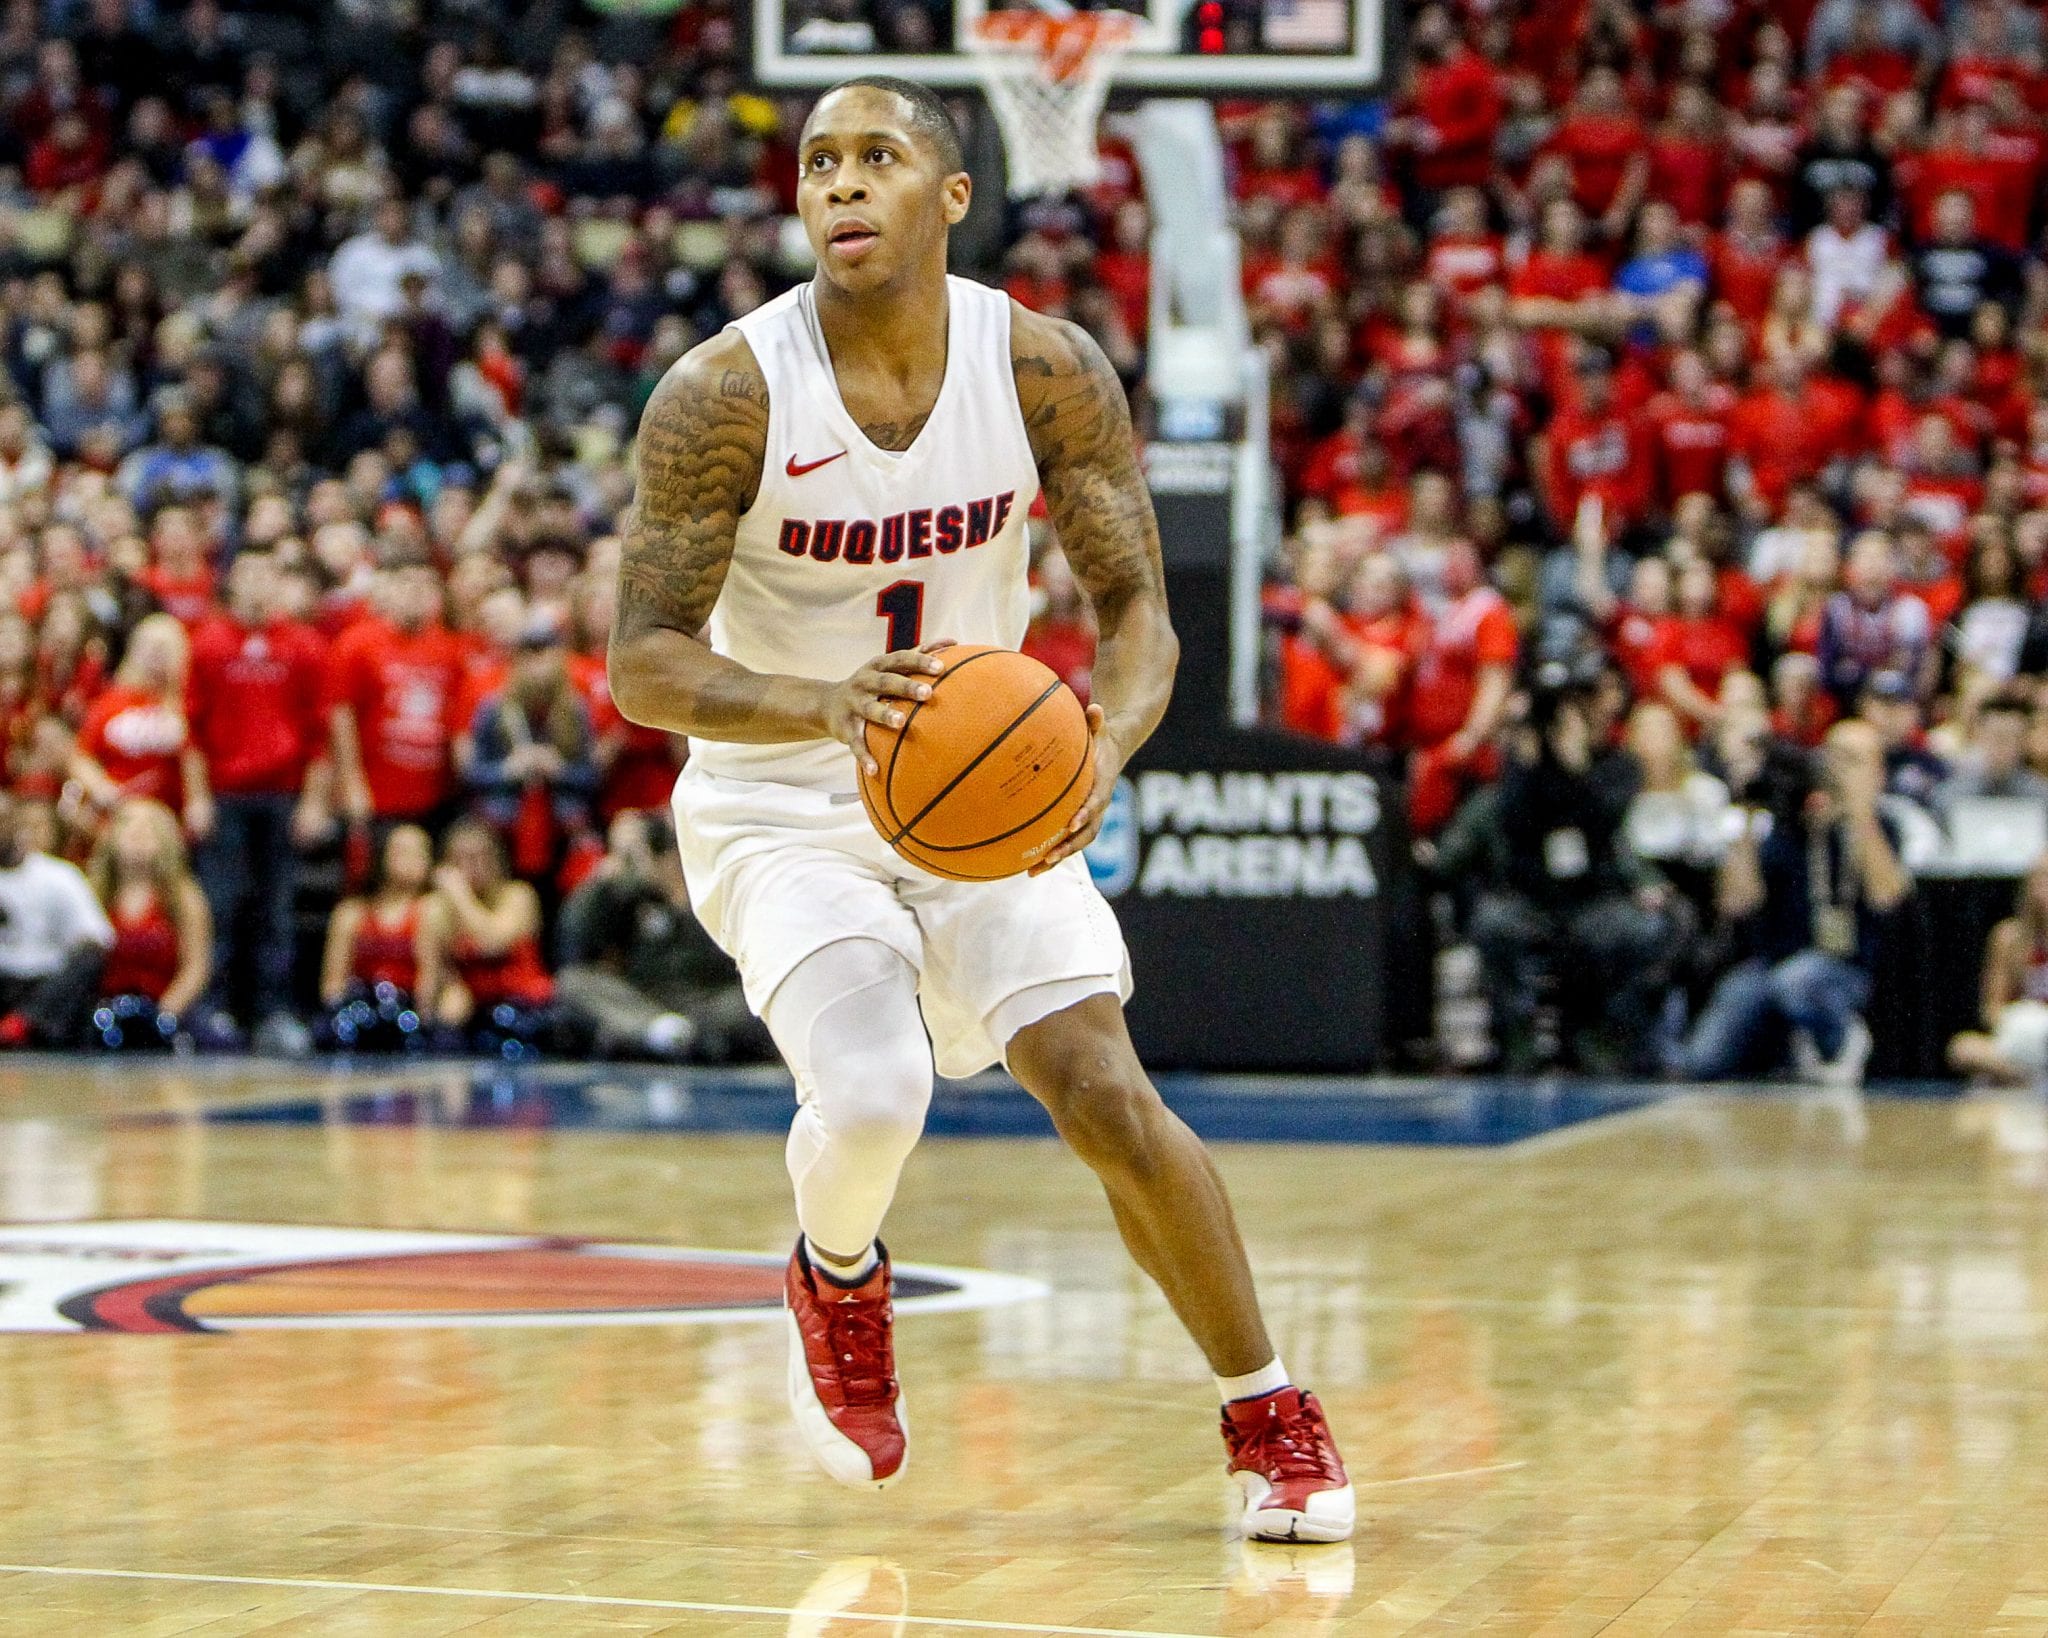 Guard Mike Lewis II to Transfer from Duquesne | Pittsburgh Sports Now2048 x 1638